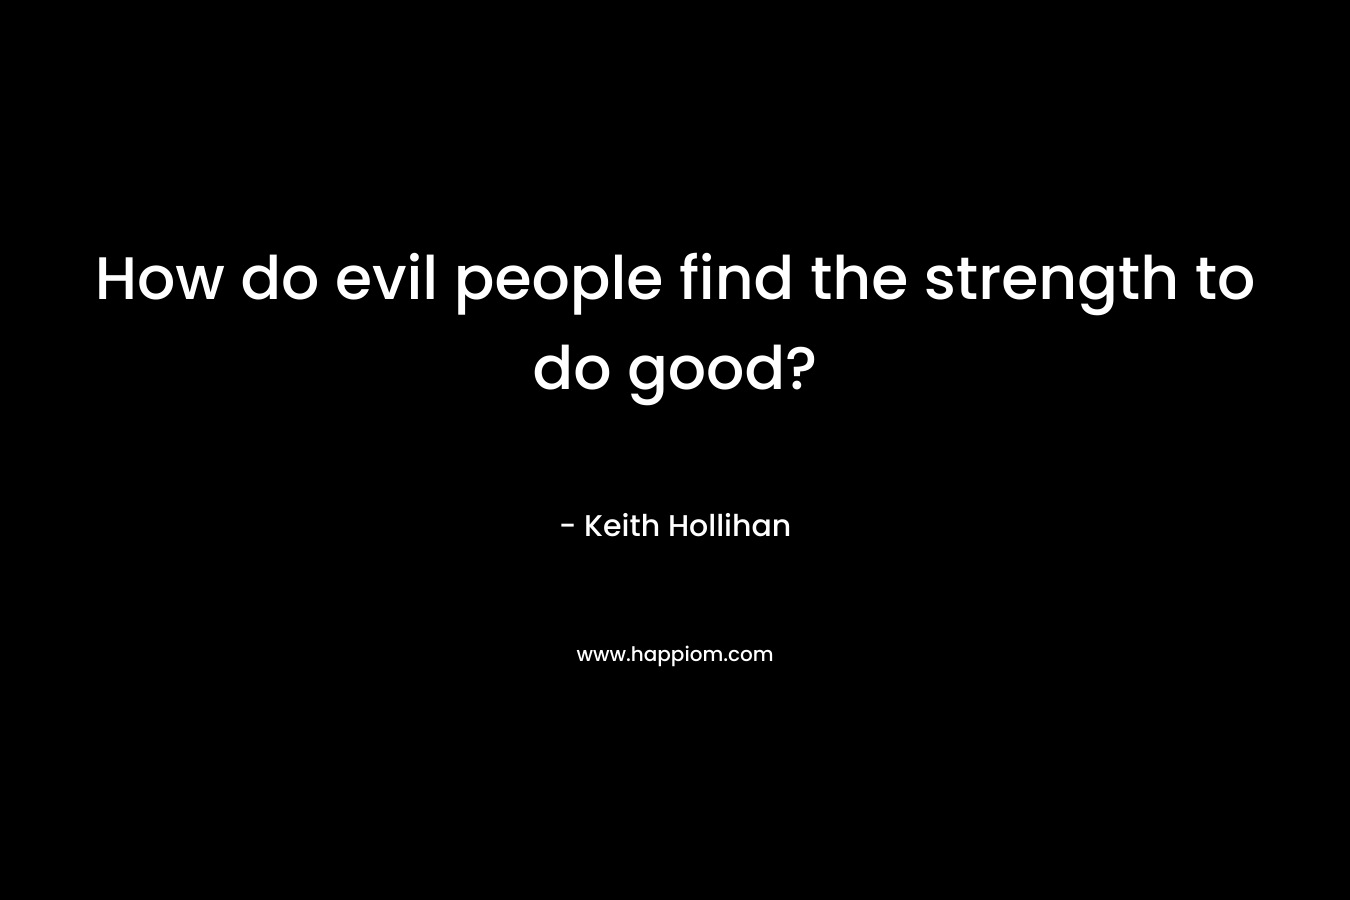 How do evil people find the strength to do good?